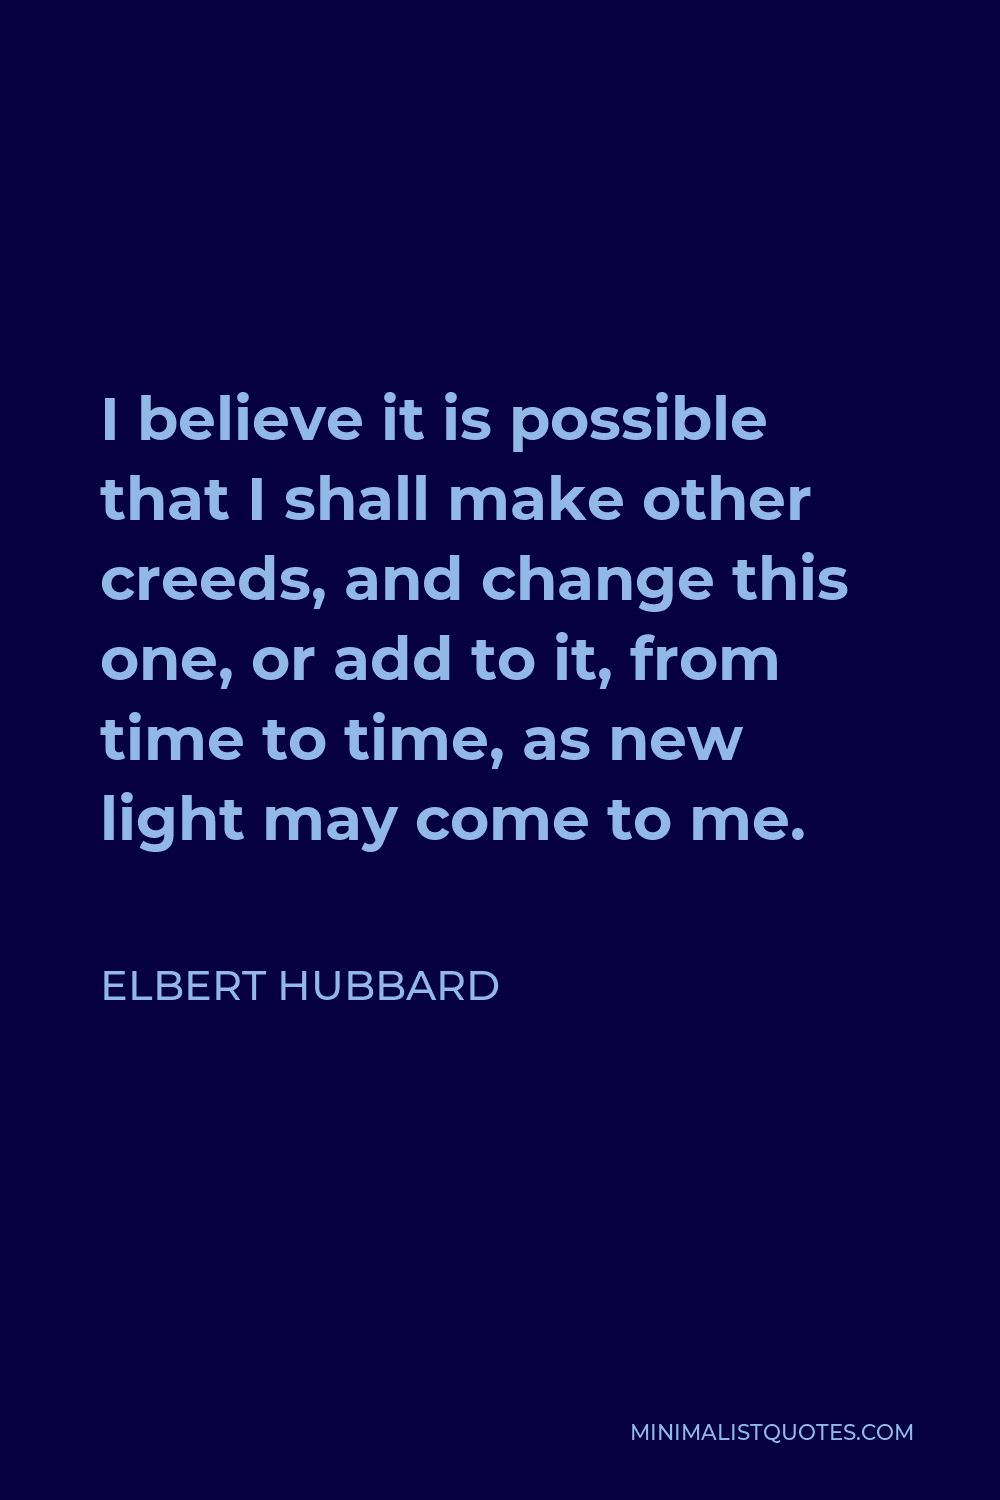 Elbert Hubbard Quote - I believe it is possible that I shall make other creeds, and change this one, or add to it, from time to time, as new light may come to me.